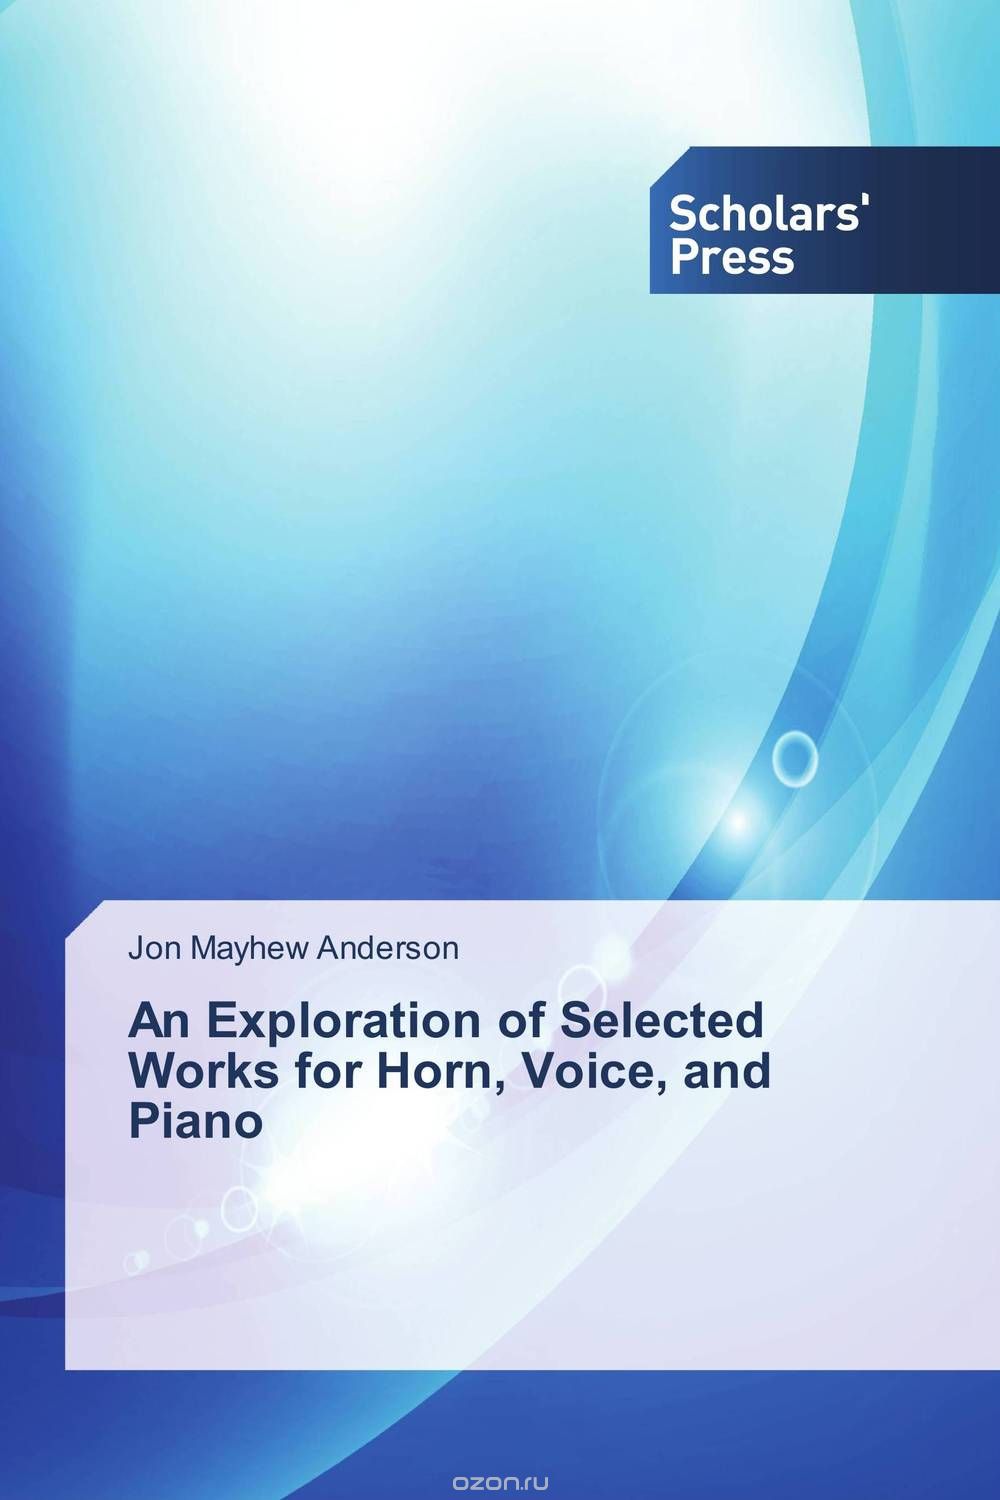 Скачать книгу "An Exploration of Selected Works for Horn, Voice, and Piano"